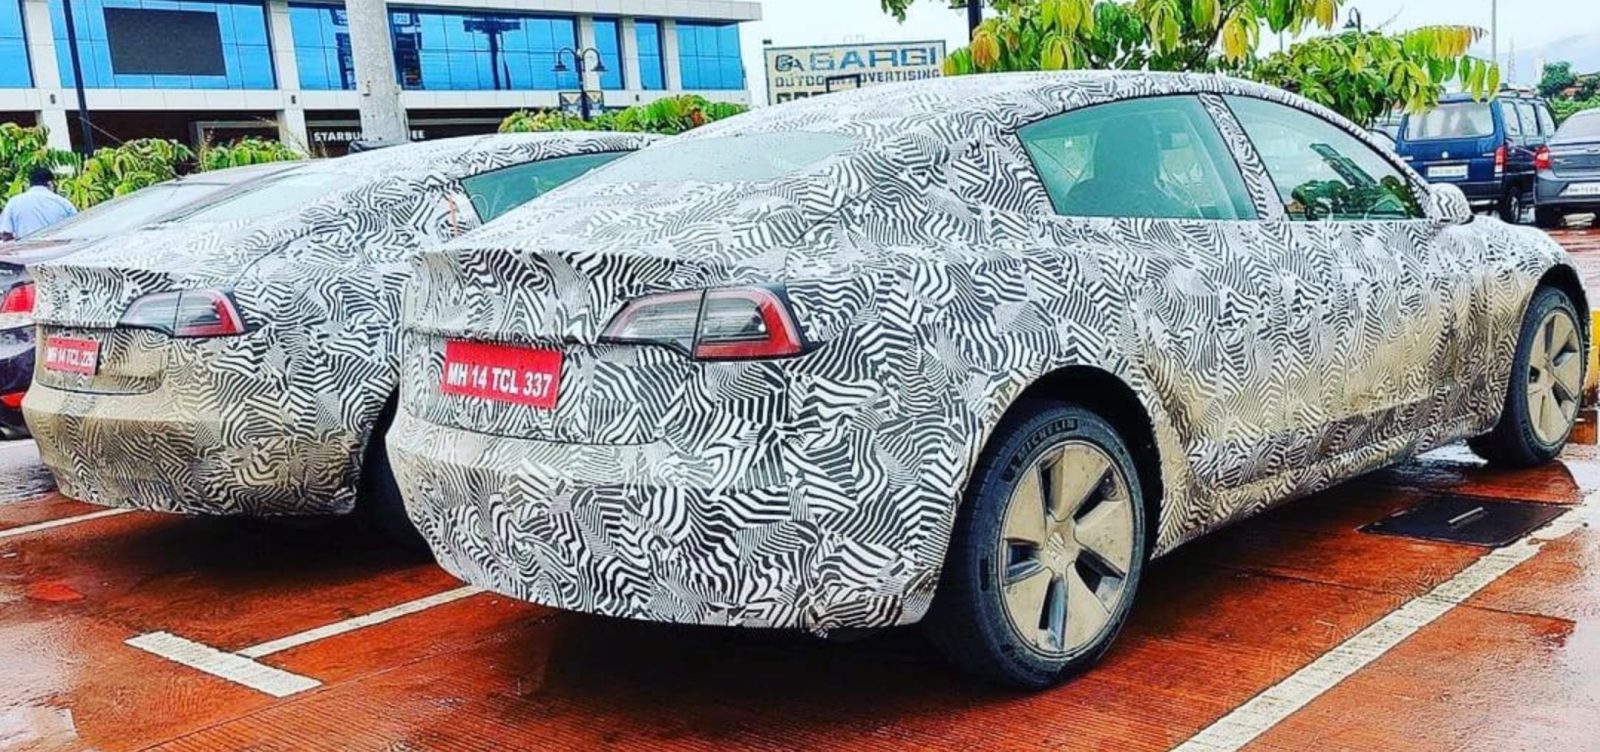 Tesla abandons plans to enter the Indian market for now